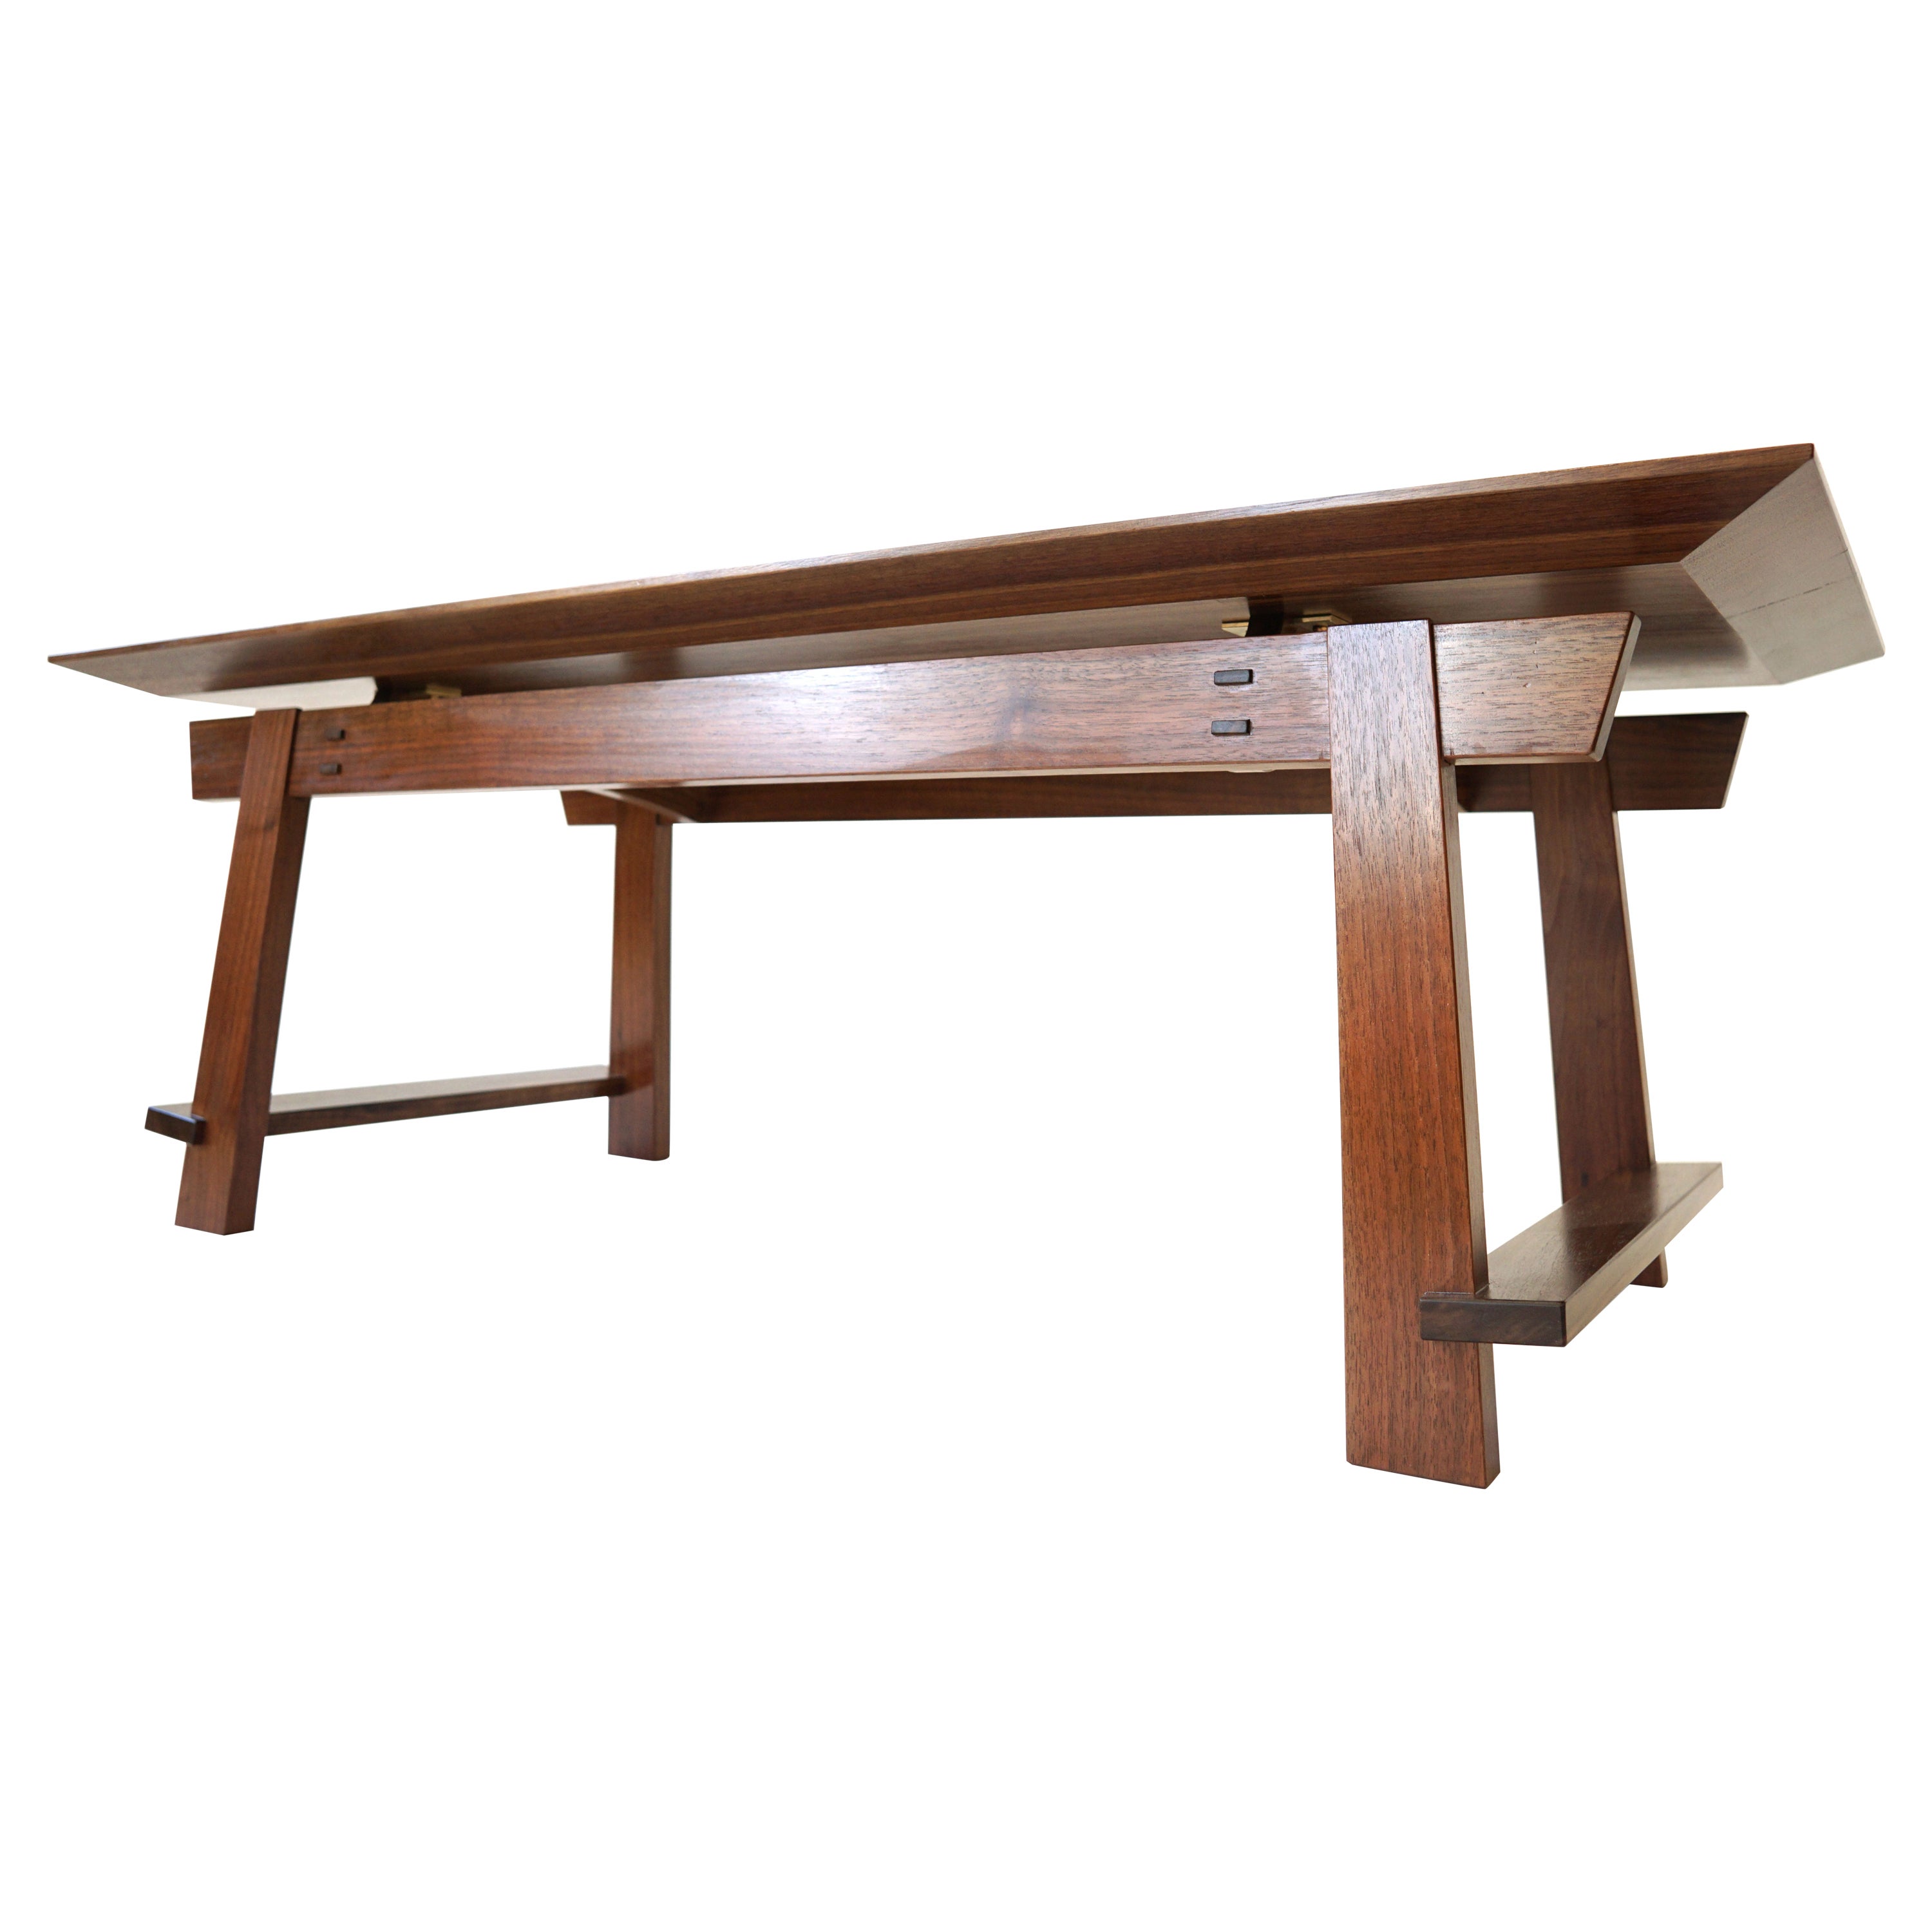 Rilley Coffee Table, Exposed Joinery, Handcrafted in Walnut For Sale